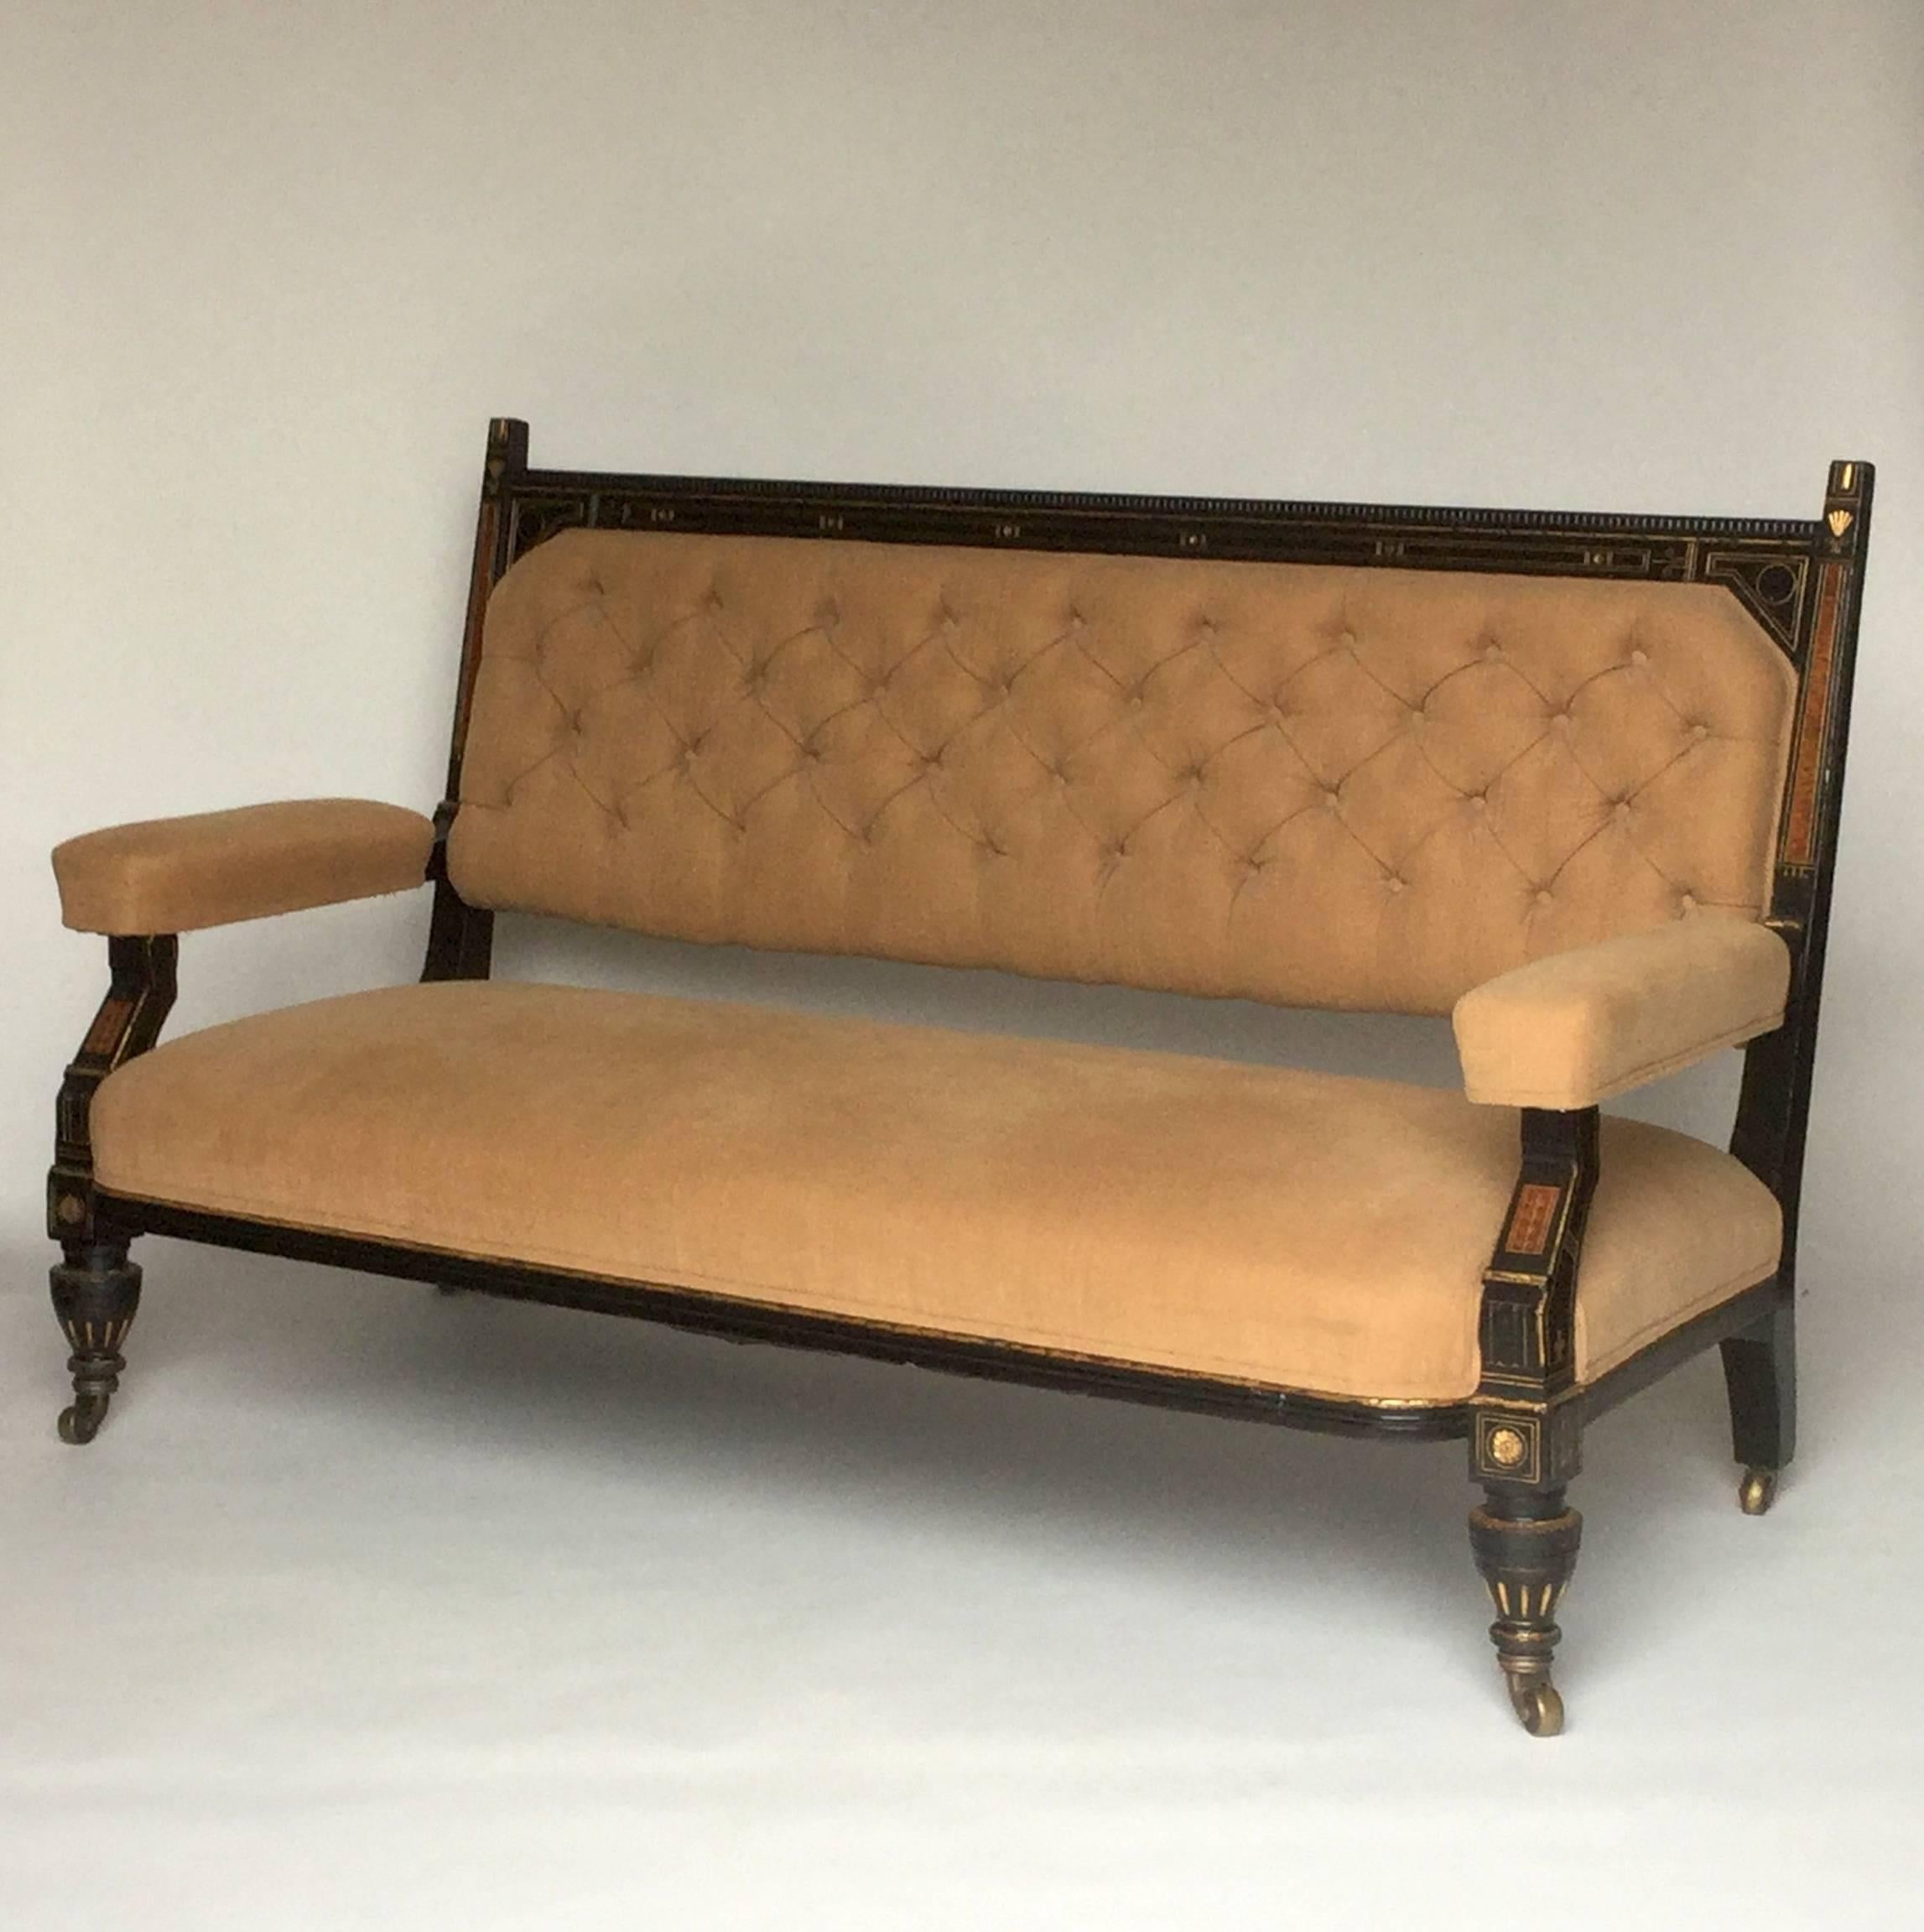 Very handsome ebonized Eastlake settee, circa 1890, ebonized oak with incised gold leaf detailing and faux bois burled wood inserts, upholstered in buff colored cotton velour with padded armrests, button tufted back with self covered buttons, brass